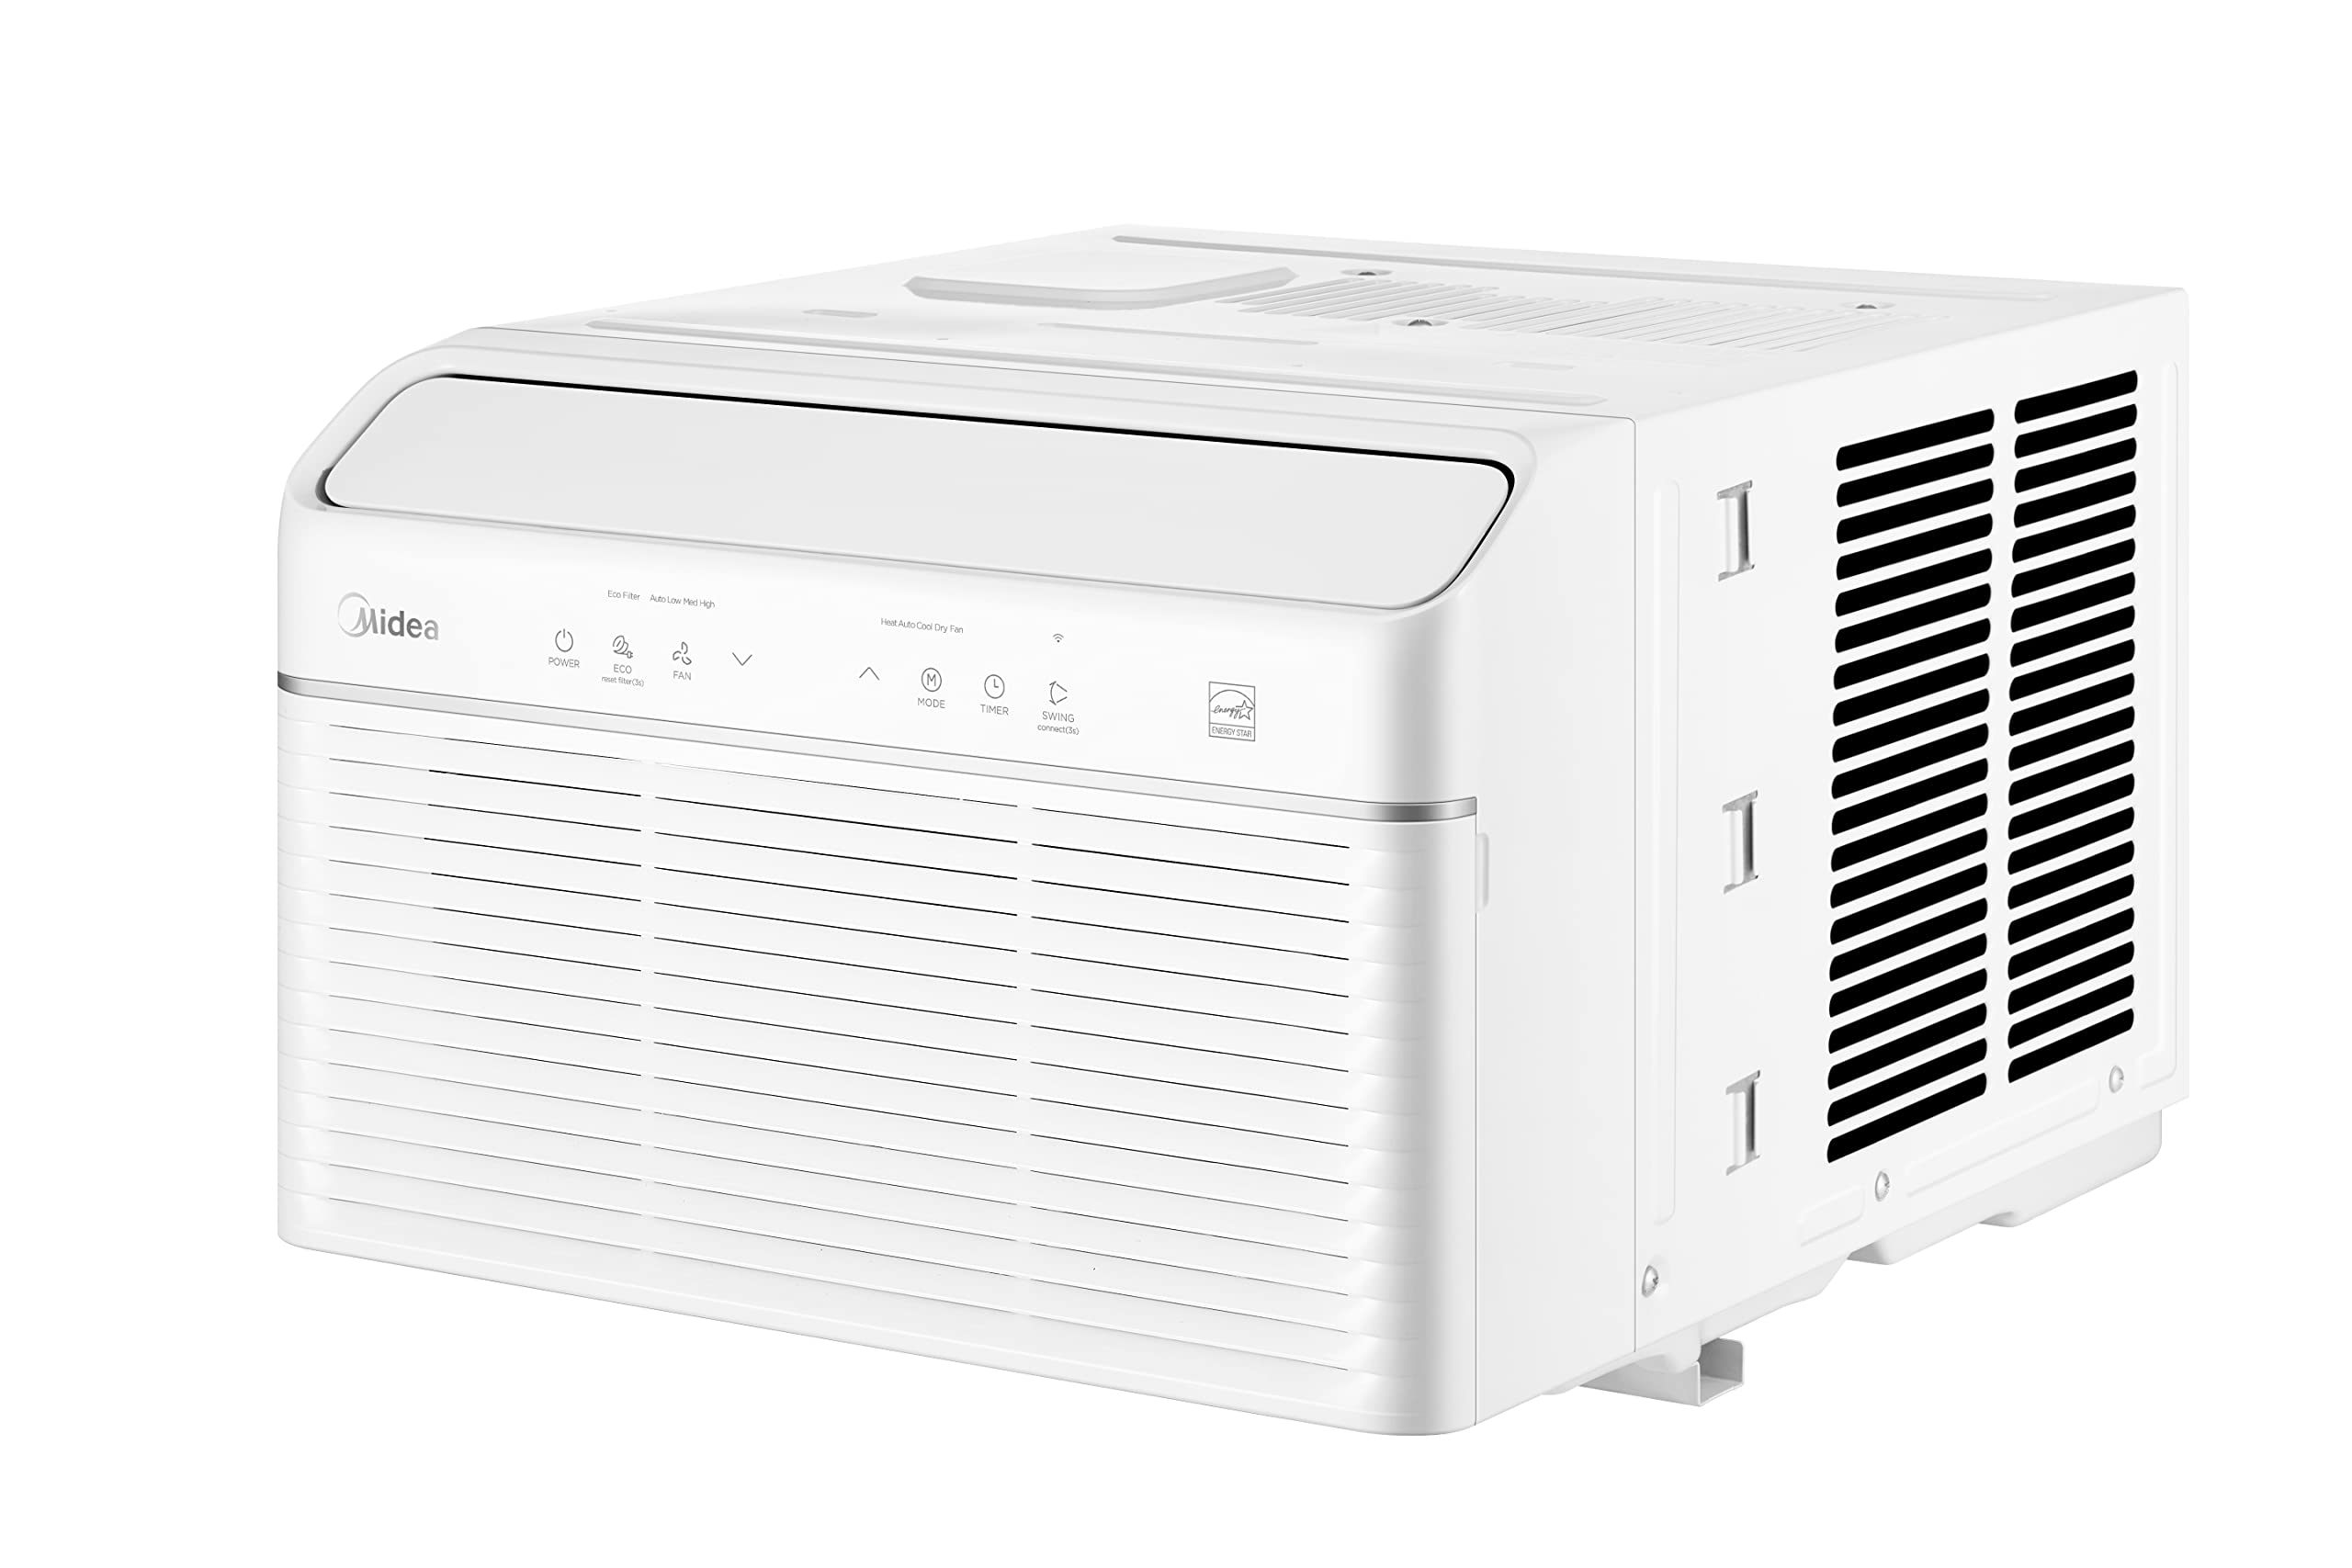 Midea 12000 BTU Smart Inverter Air Conditioner Window Unit with Heat and Dehumidifier - Cools up to 550 Sq. Ft., Energy Star Rat